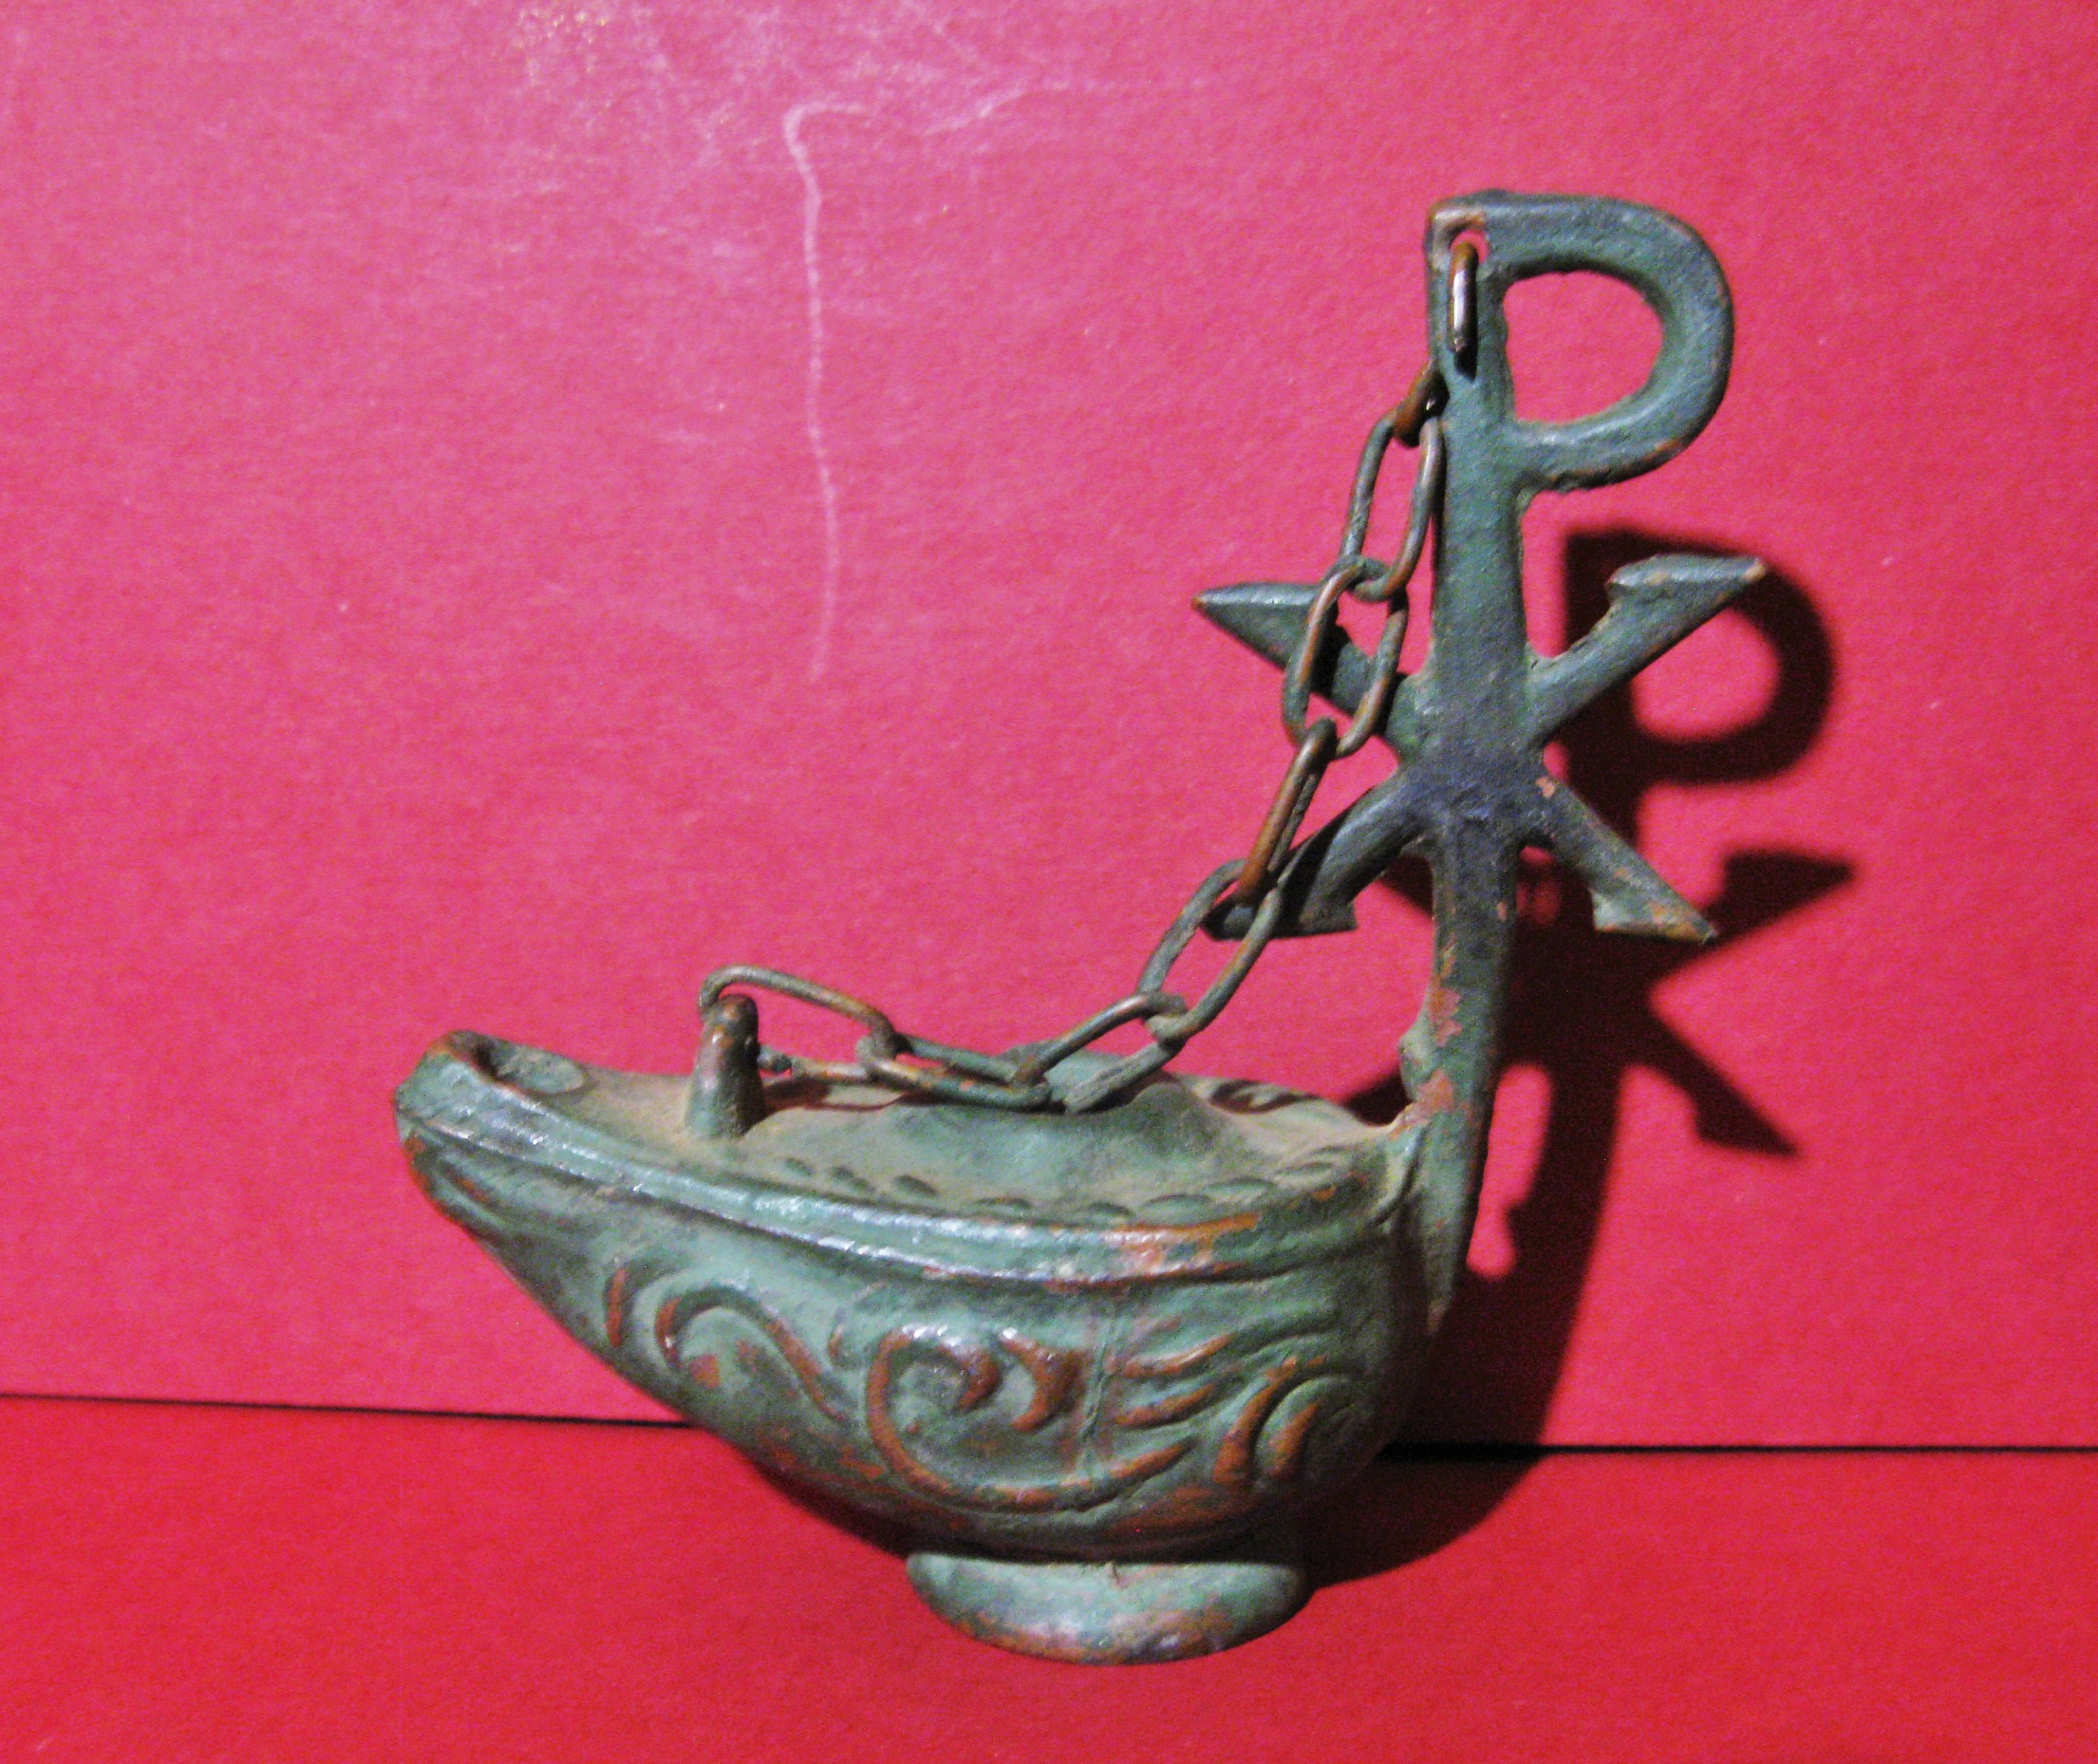 Brass ornate genie oil lamp gorgeous piece 7.25 By 3.25 Inches